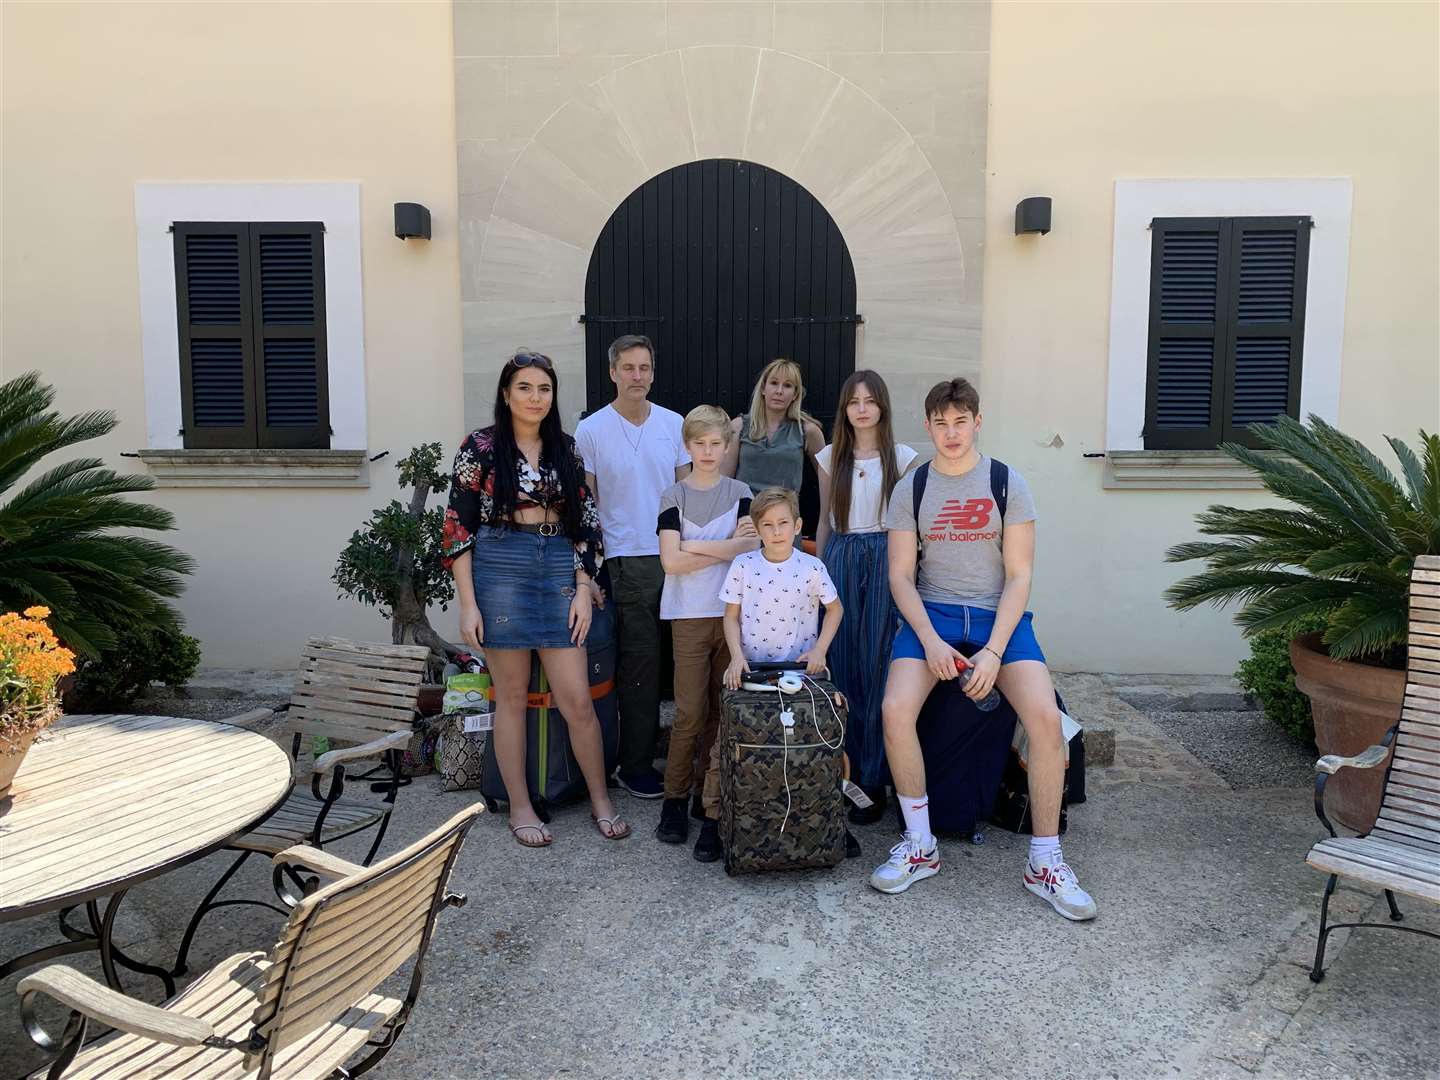 Angus Kennedy and his family outside the villa they expected to be renting. (8834300)